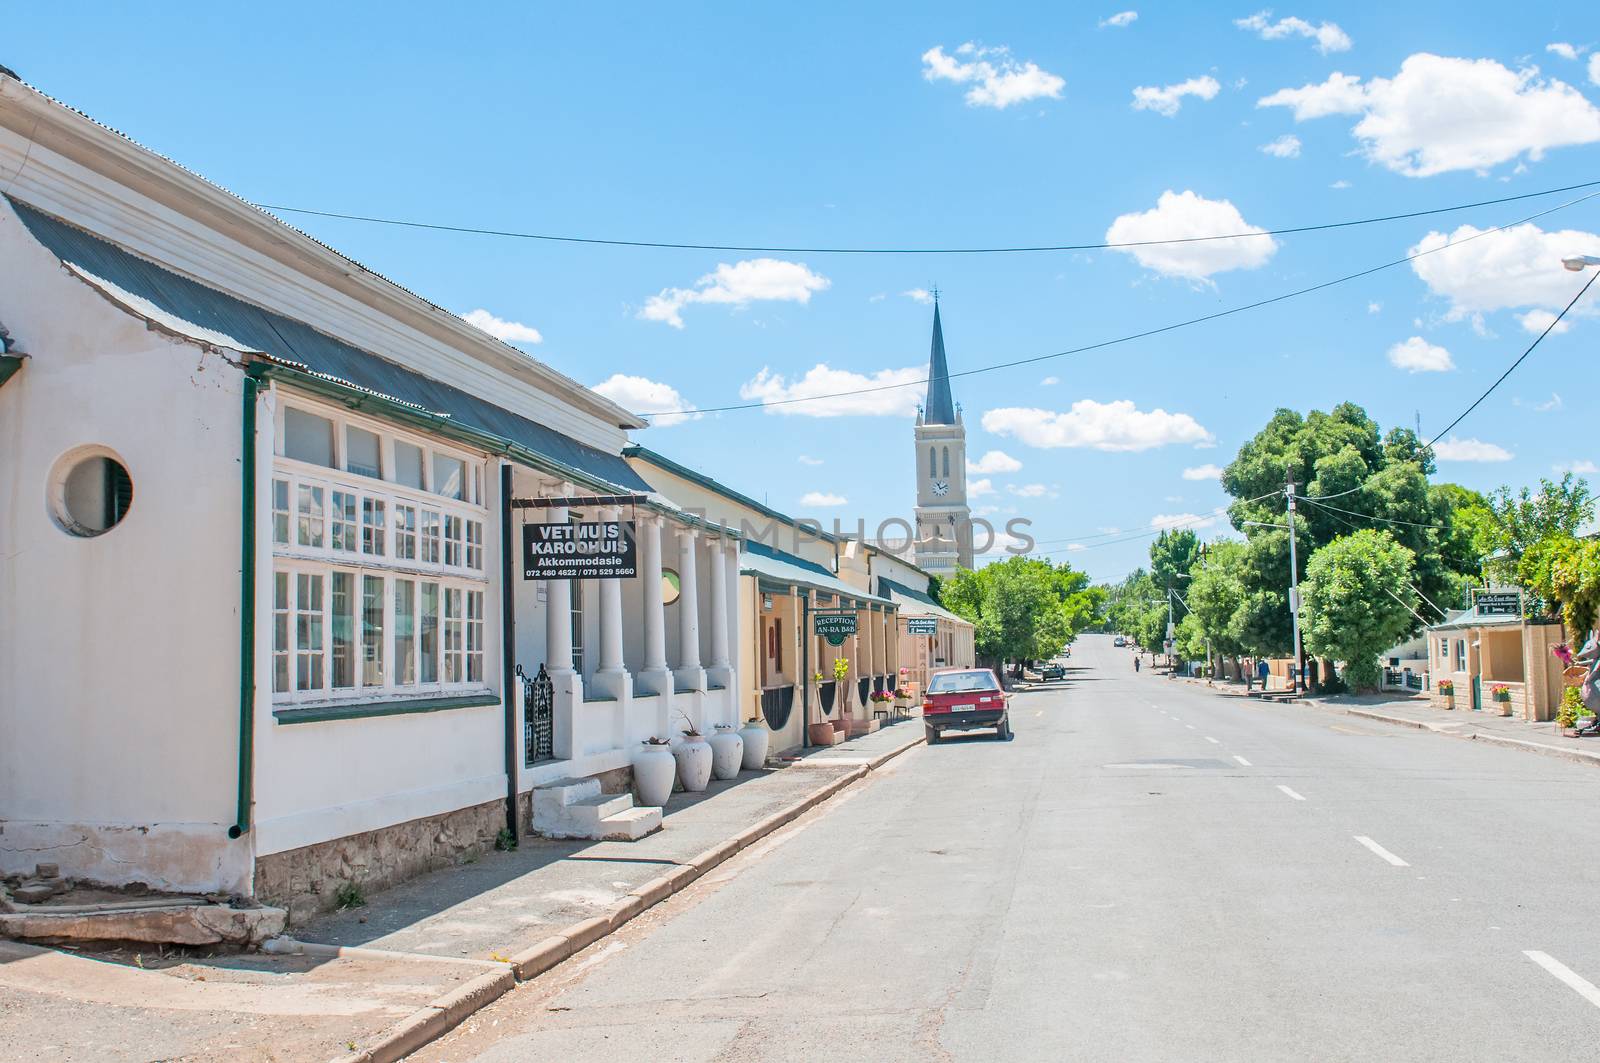 RICHMOND, SOUTH AFRICA - DECEMBER 1, 2014: Street scene with the historic Dutch Reformed Church iin the background